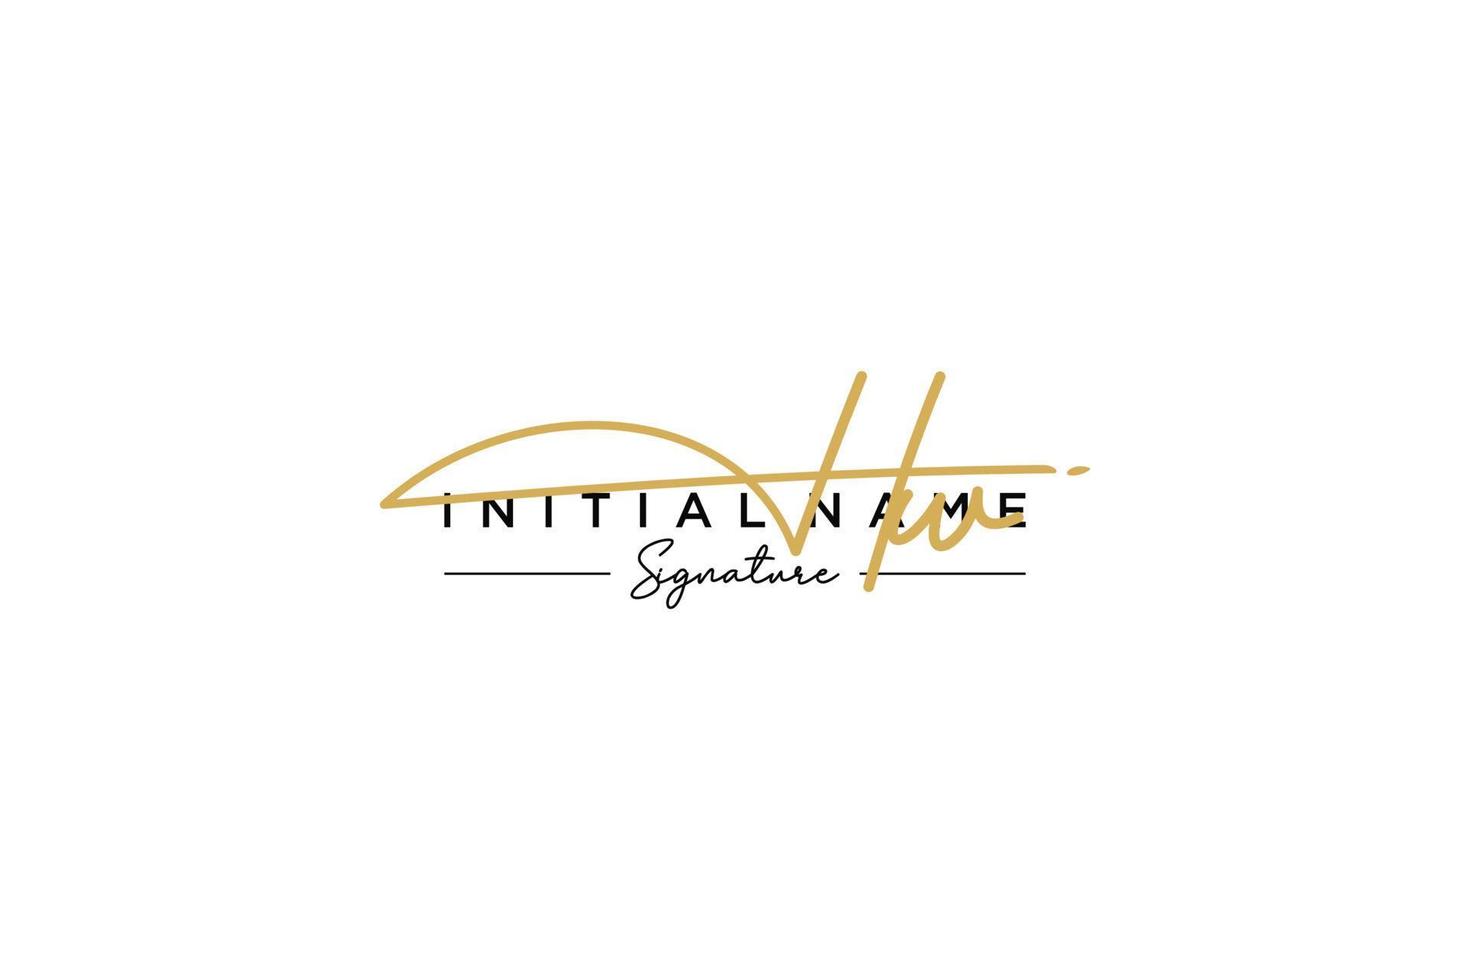 Initial HW signature logo template vector. Hand drawn Calligraphy lettering Vector illustration.